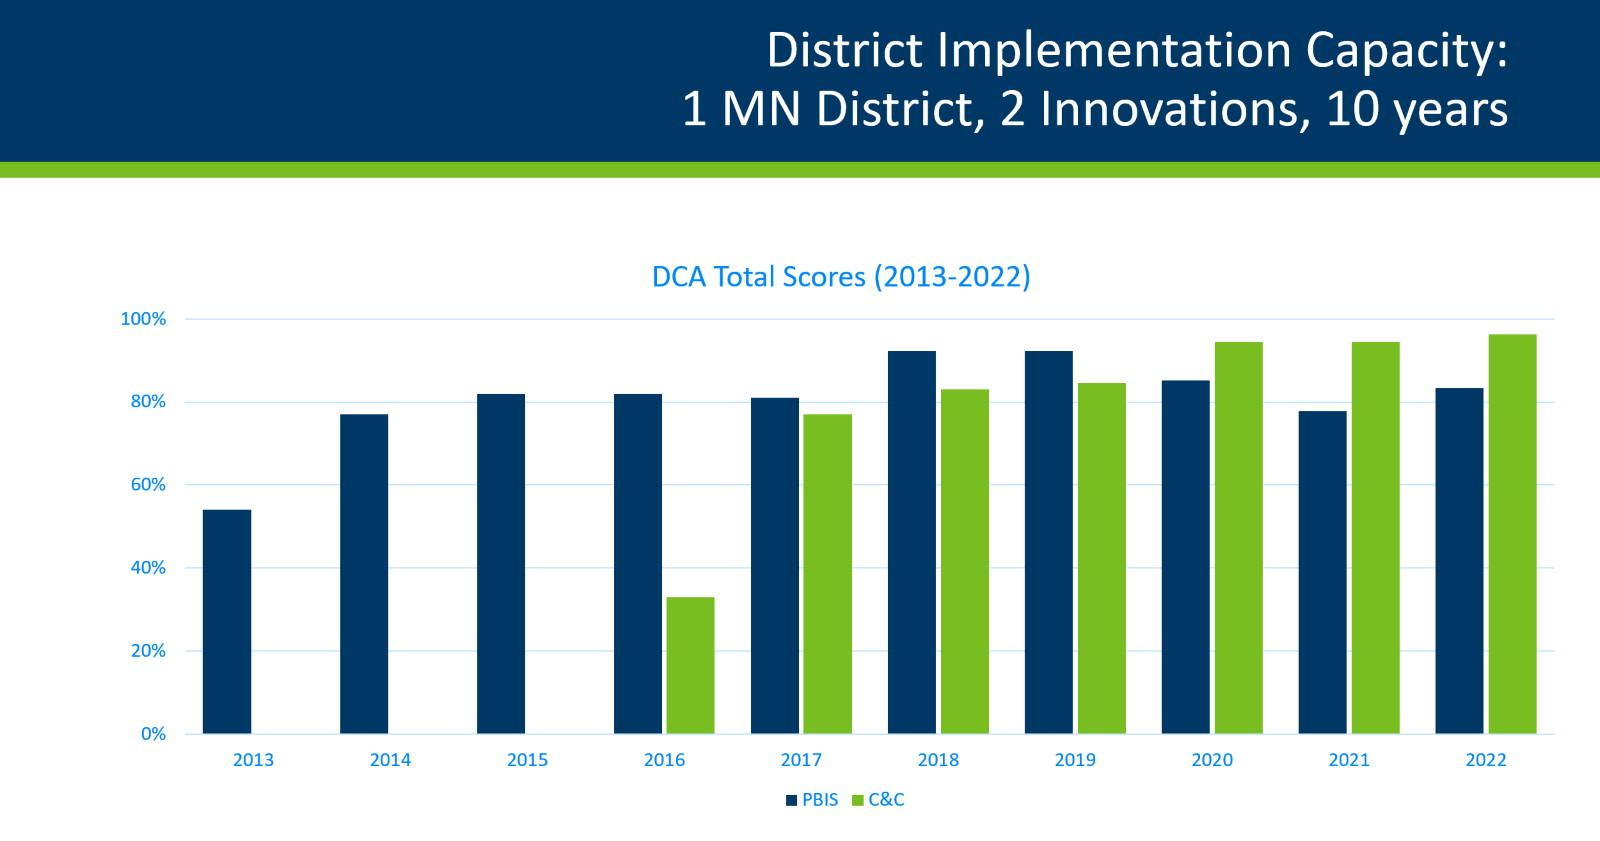 Bar graph indicating total DCA scores for one district over 10 time points from 2013-2022. Scores for PBIS increased for the first three years, stayed relatively stable for 2 more years, peaked in 2018 and 2019, then dipped some in the last 3 years. Scores for Check & Connect increased from the first year they were included - 2016 - through 2022.